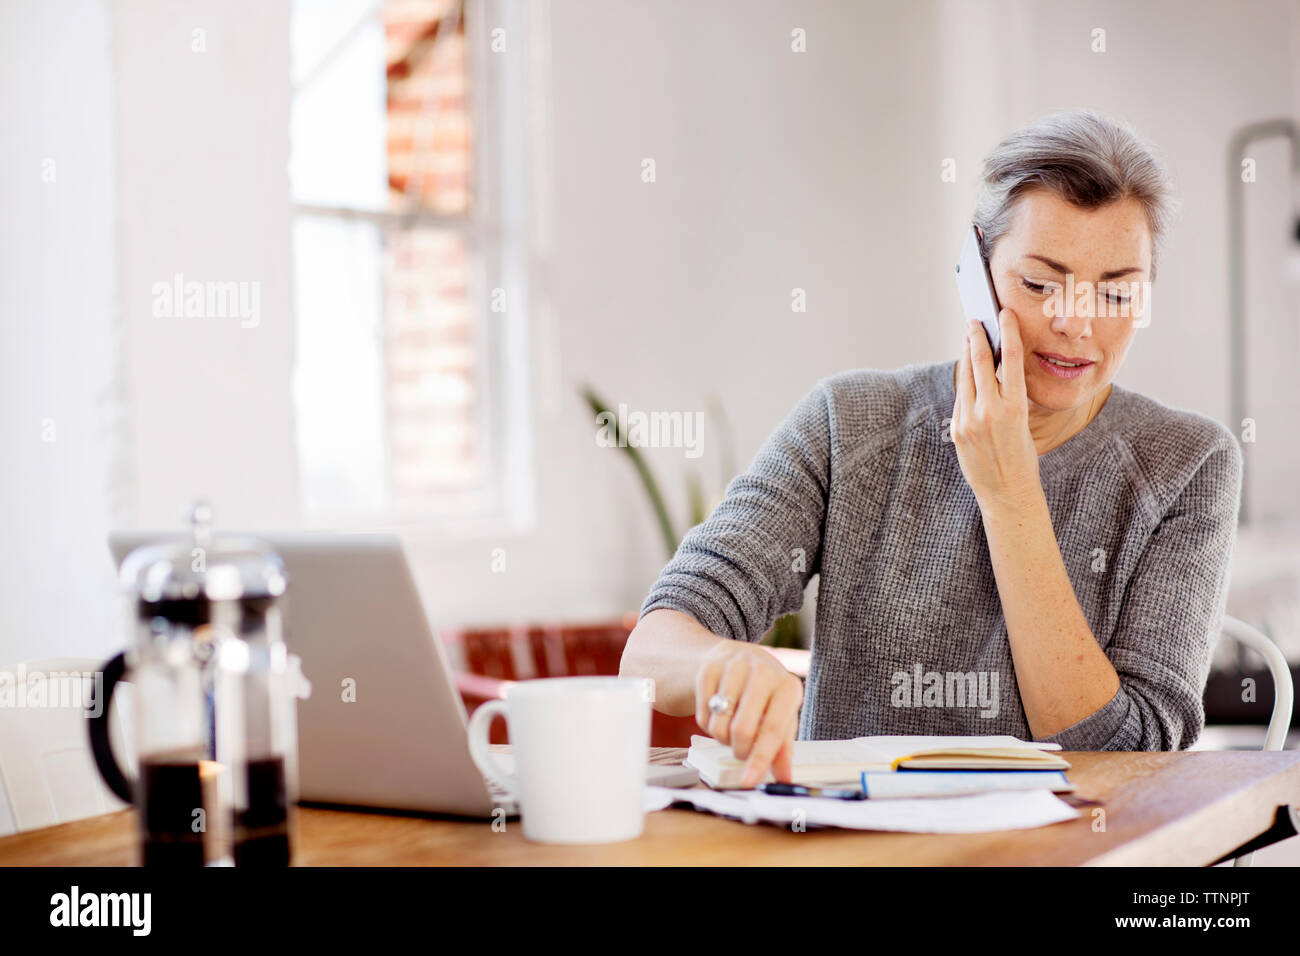 Mature woman communicating on phone while working at table Stock Photo